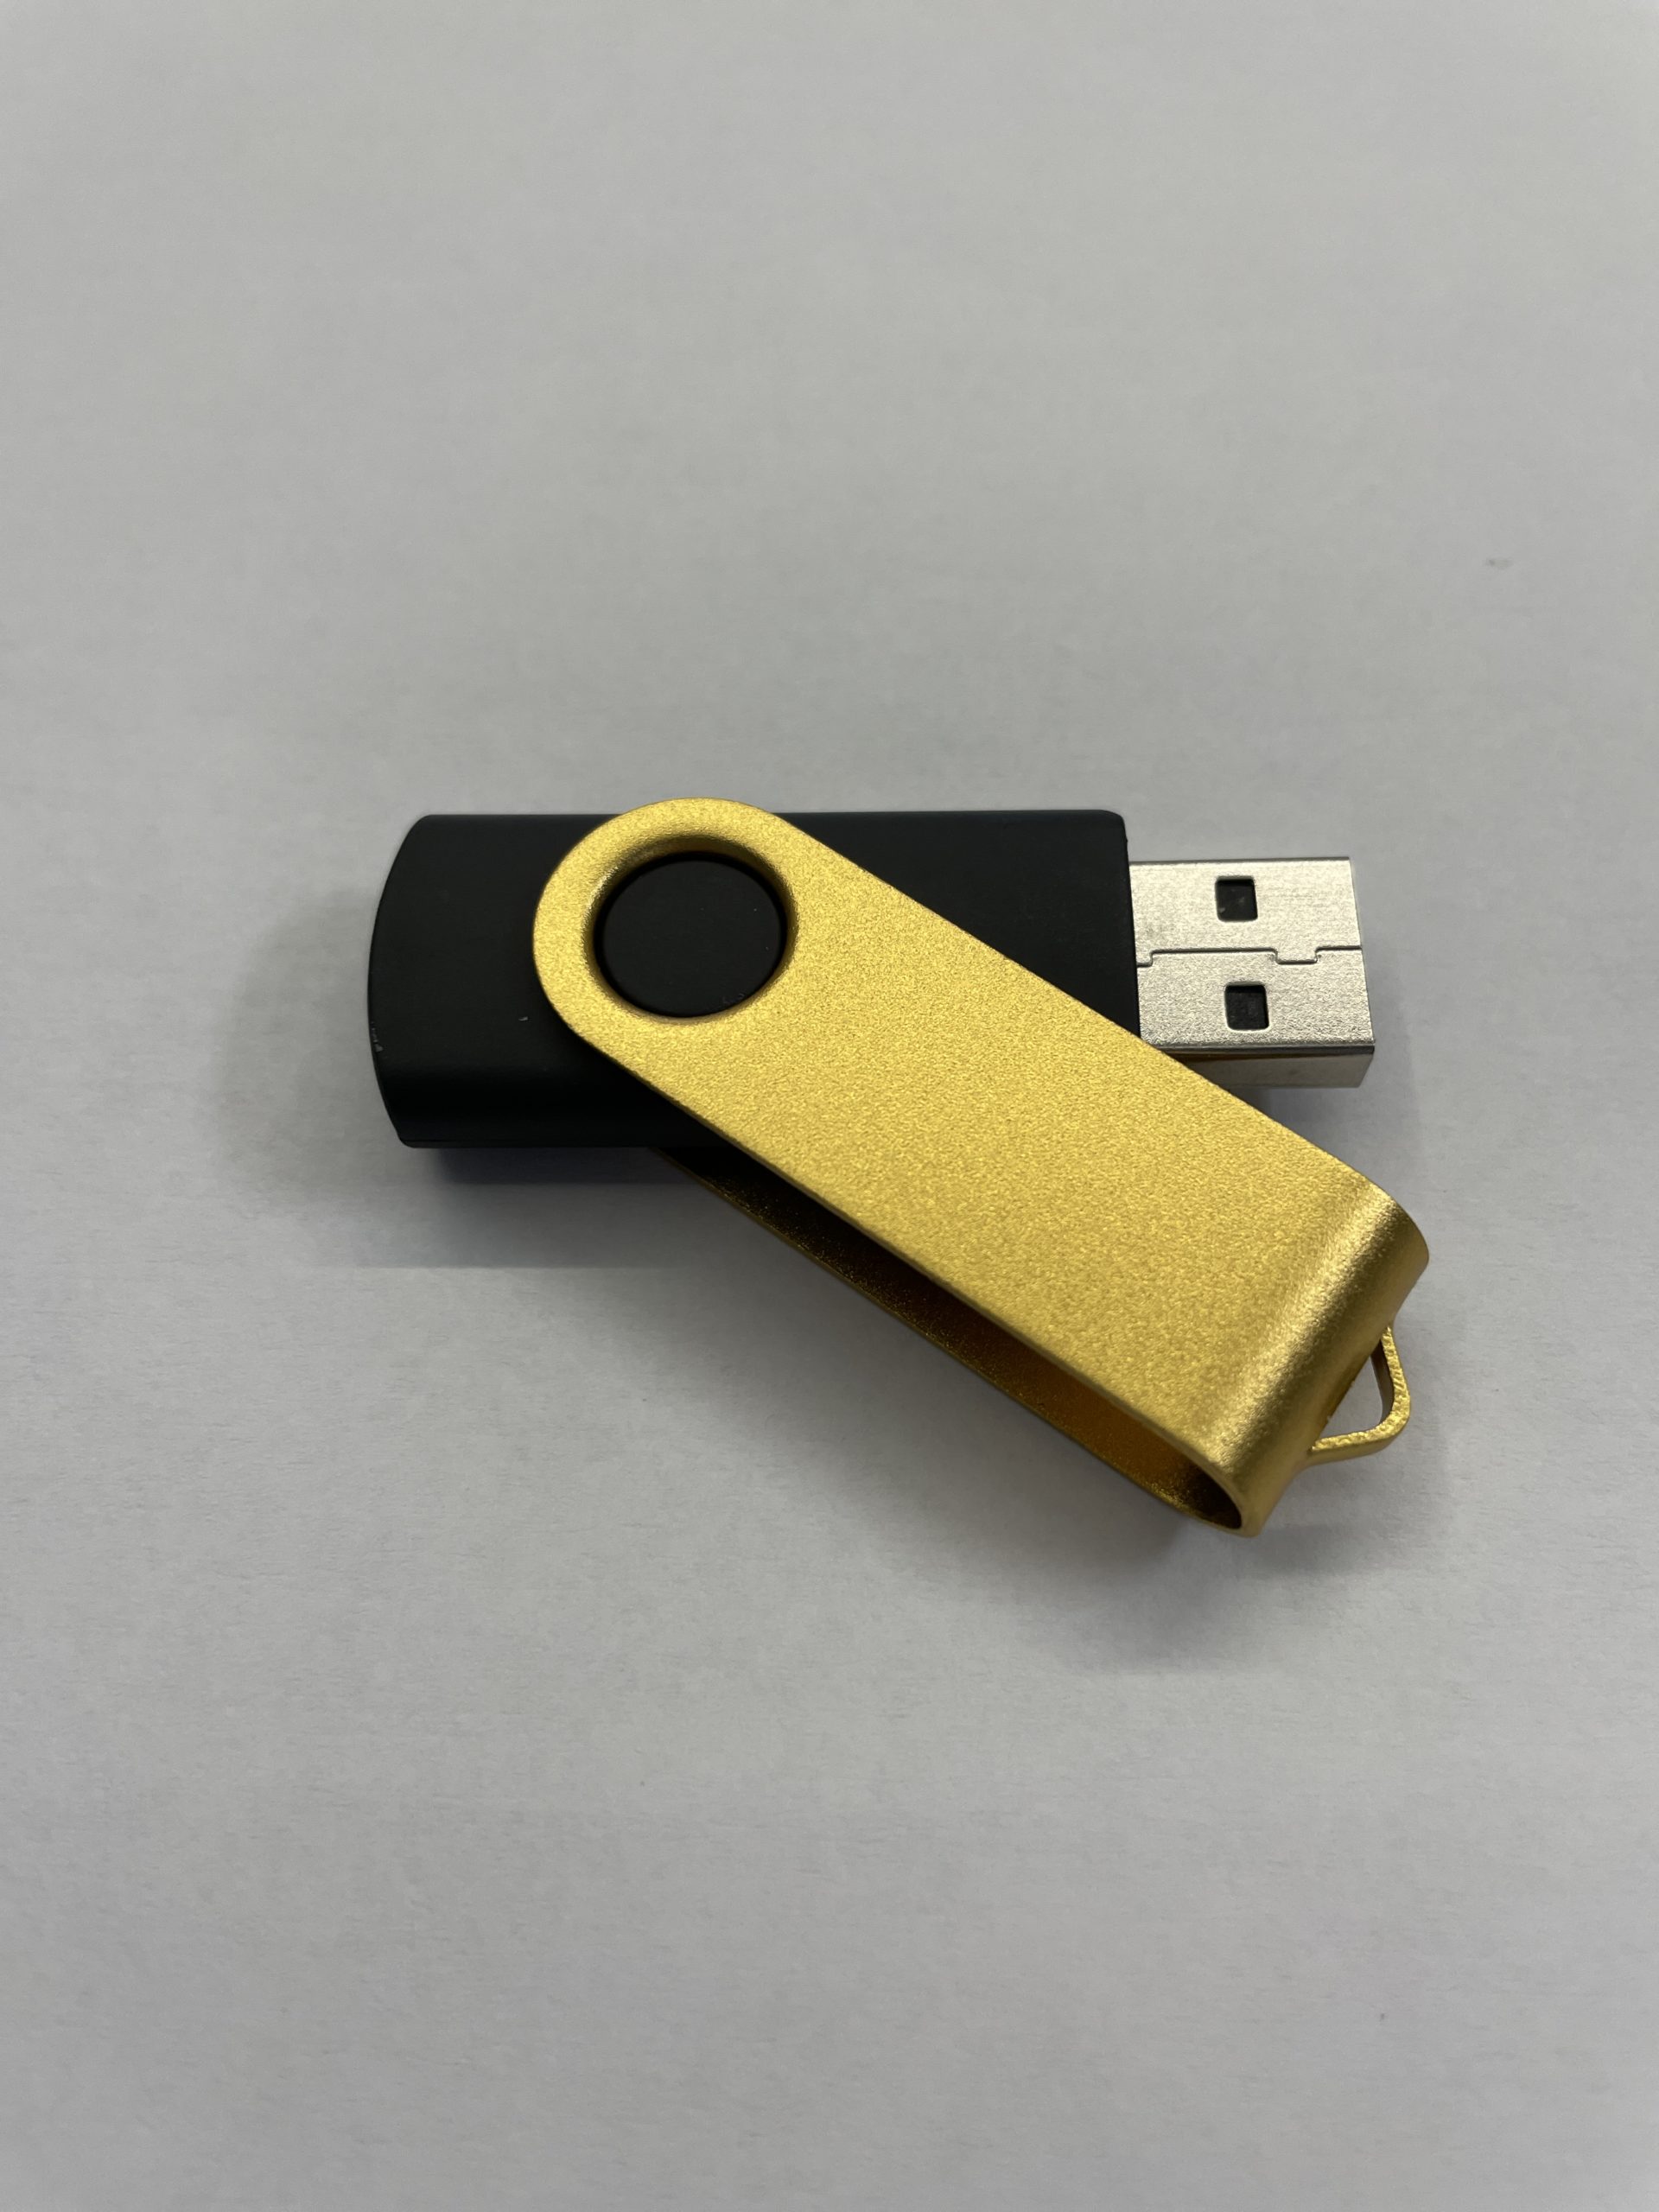 2TB Flash Scam: Why “High-Capacity” Flash Drives Are Fakes Datarecovery.com